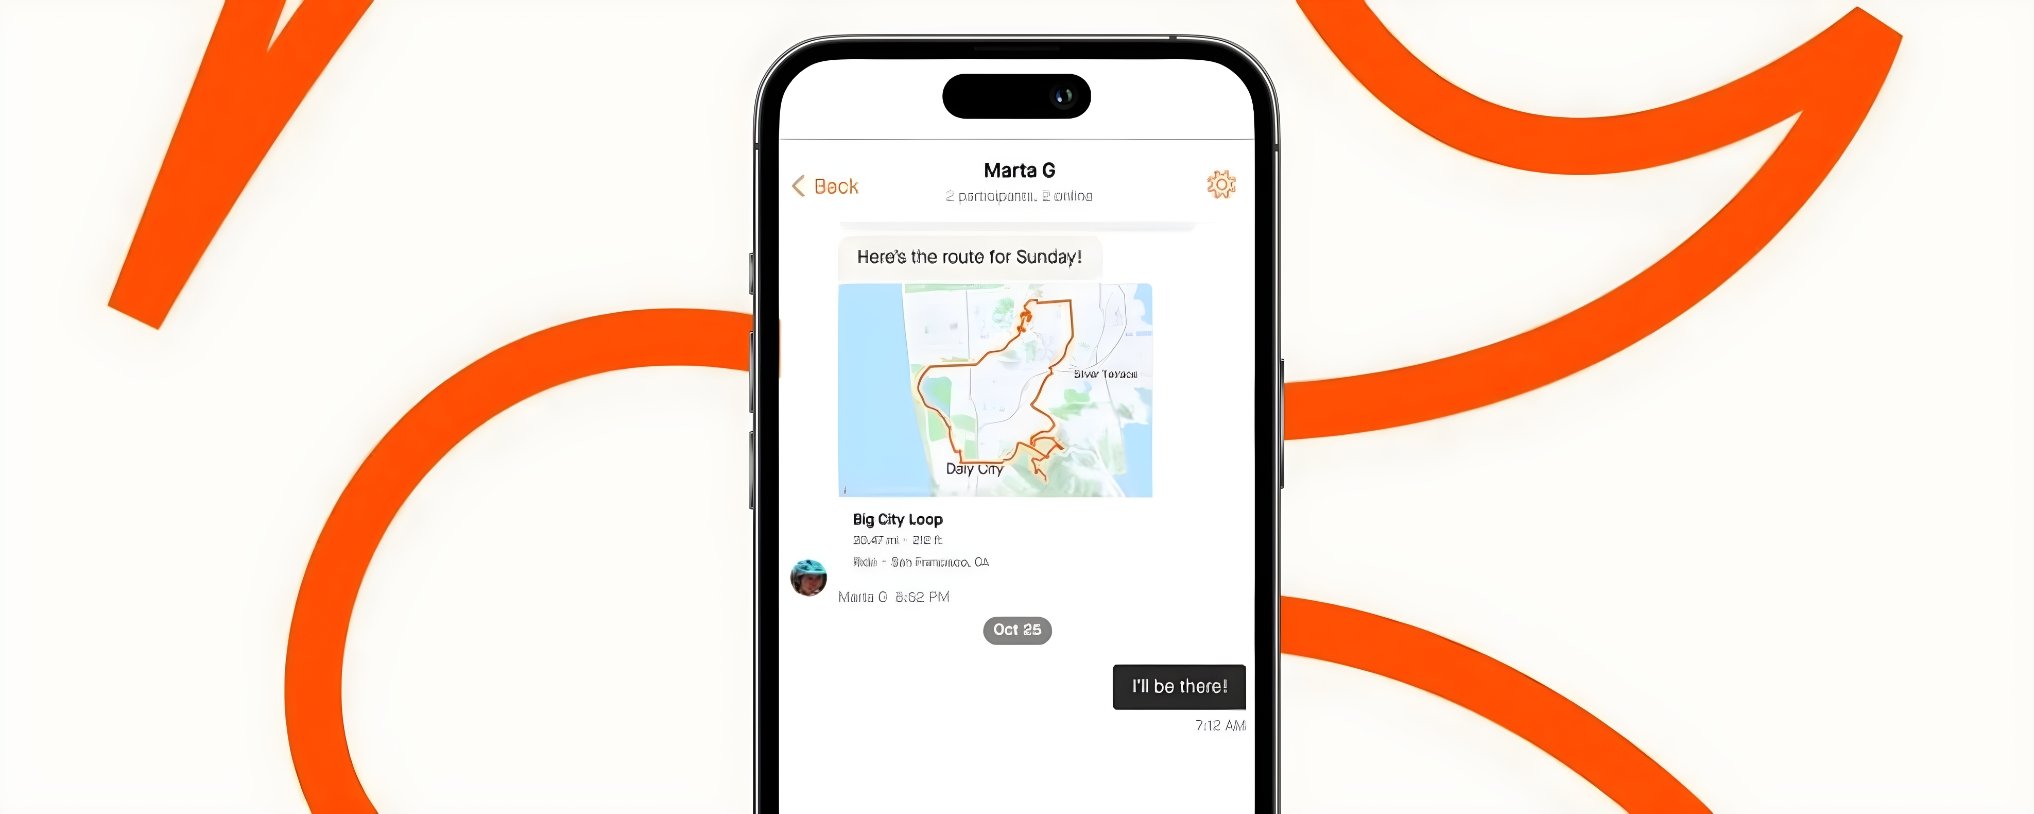 Strava chat by iphon